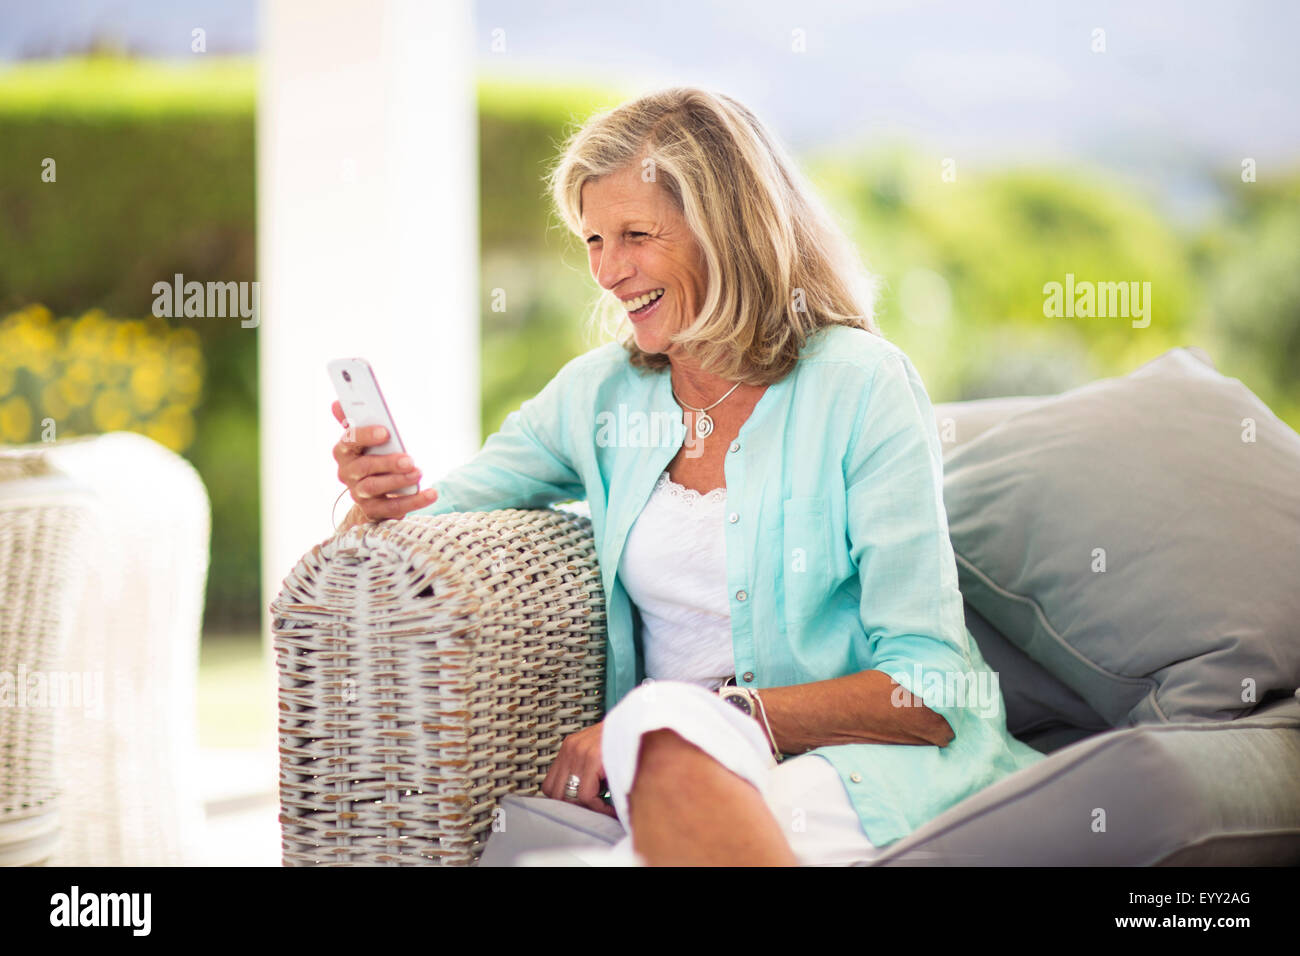 Caucasian woman using cell phone on sofa outdoors Stock Photo